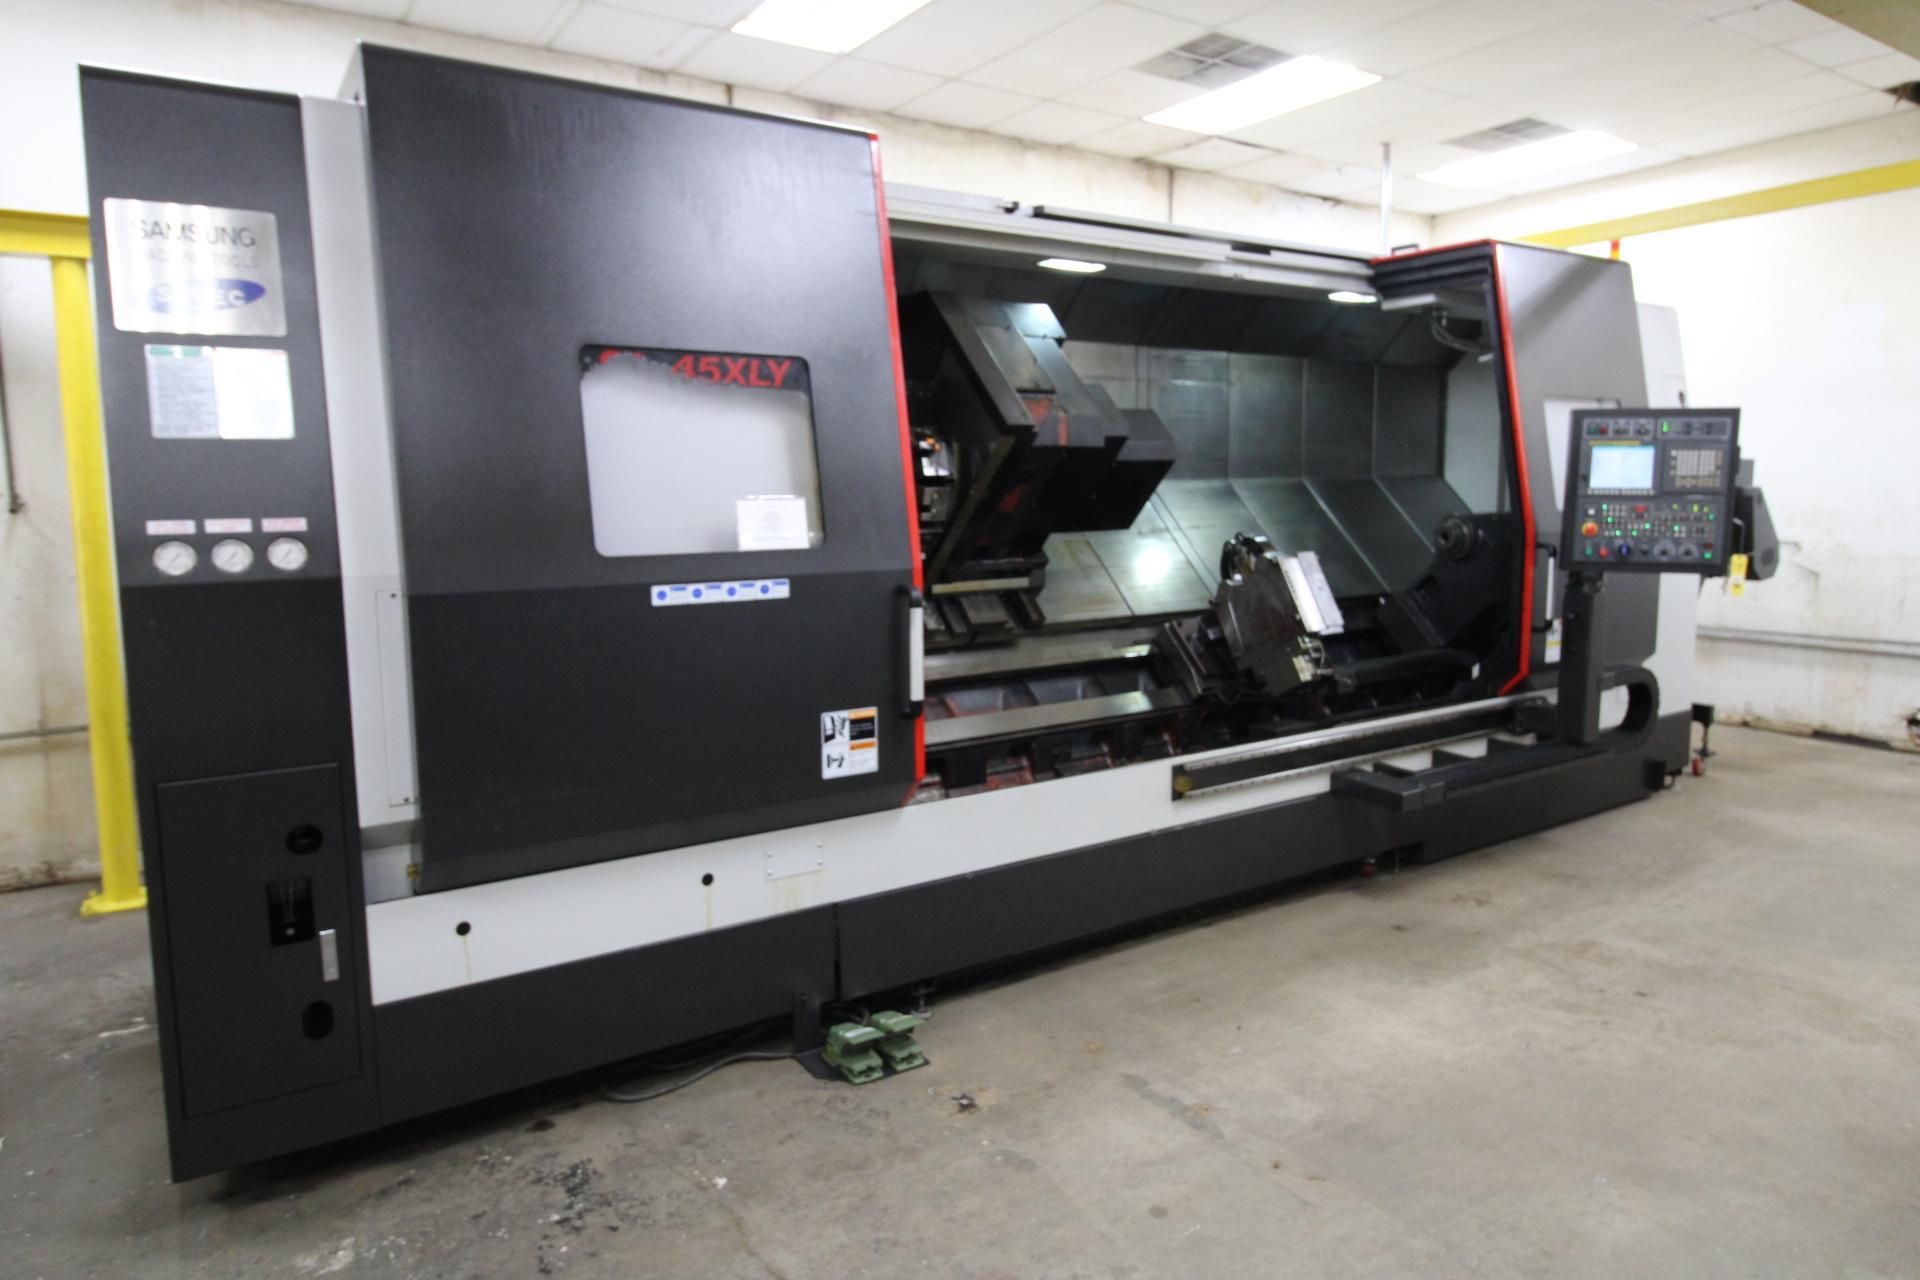 MULTI AXIS CNC MILLING & TURNING CENTER, SAMSUNG MDL. SL-45XLY, new 2014, Live tooling & Y-axis, 6. - Image 2 of 15